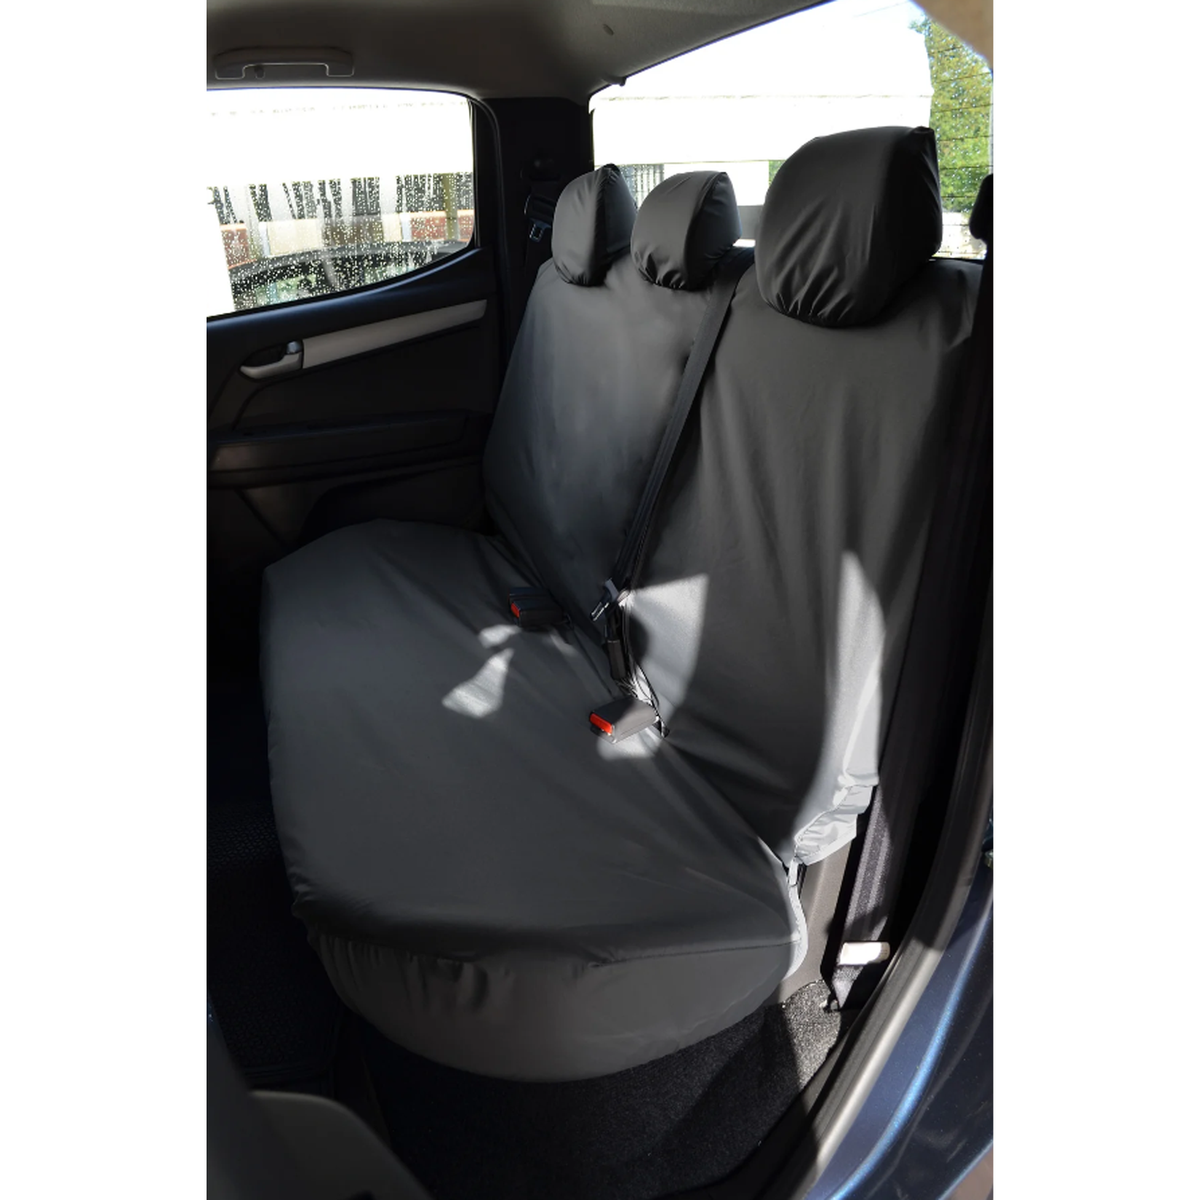 Isuzu D-max 2021 Onward Rear Seat Covers - Black Without Central Armrest